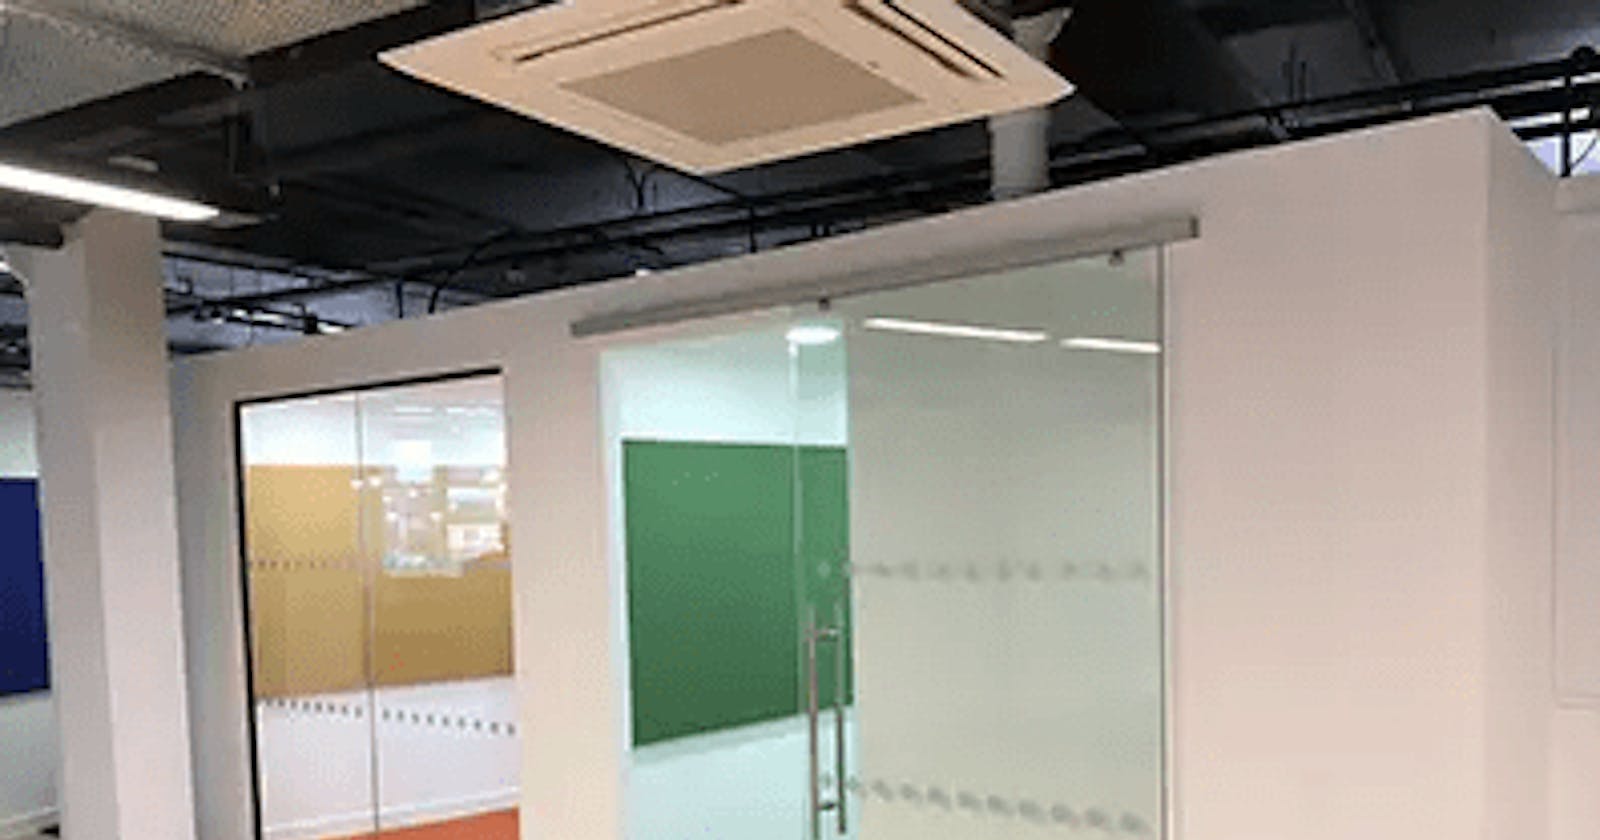 Glass Partitions Manchester - Suspended Ceilings Manchester UK